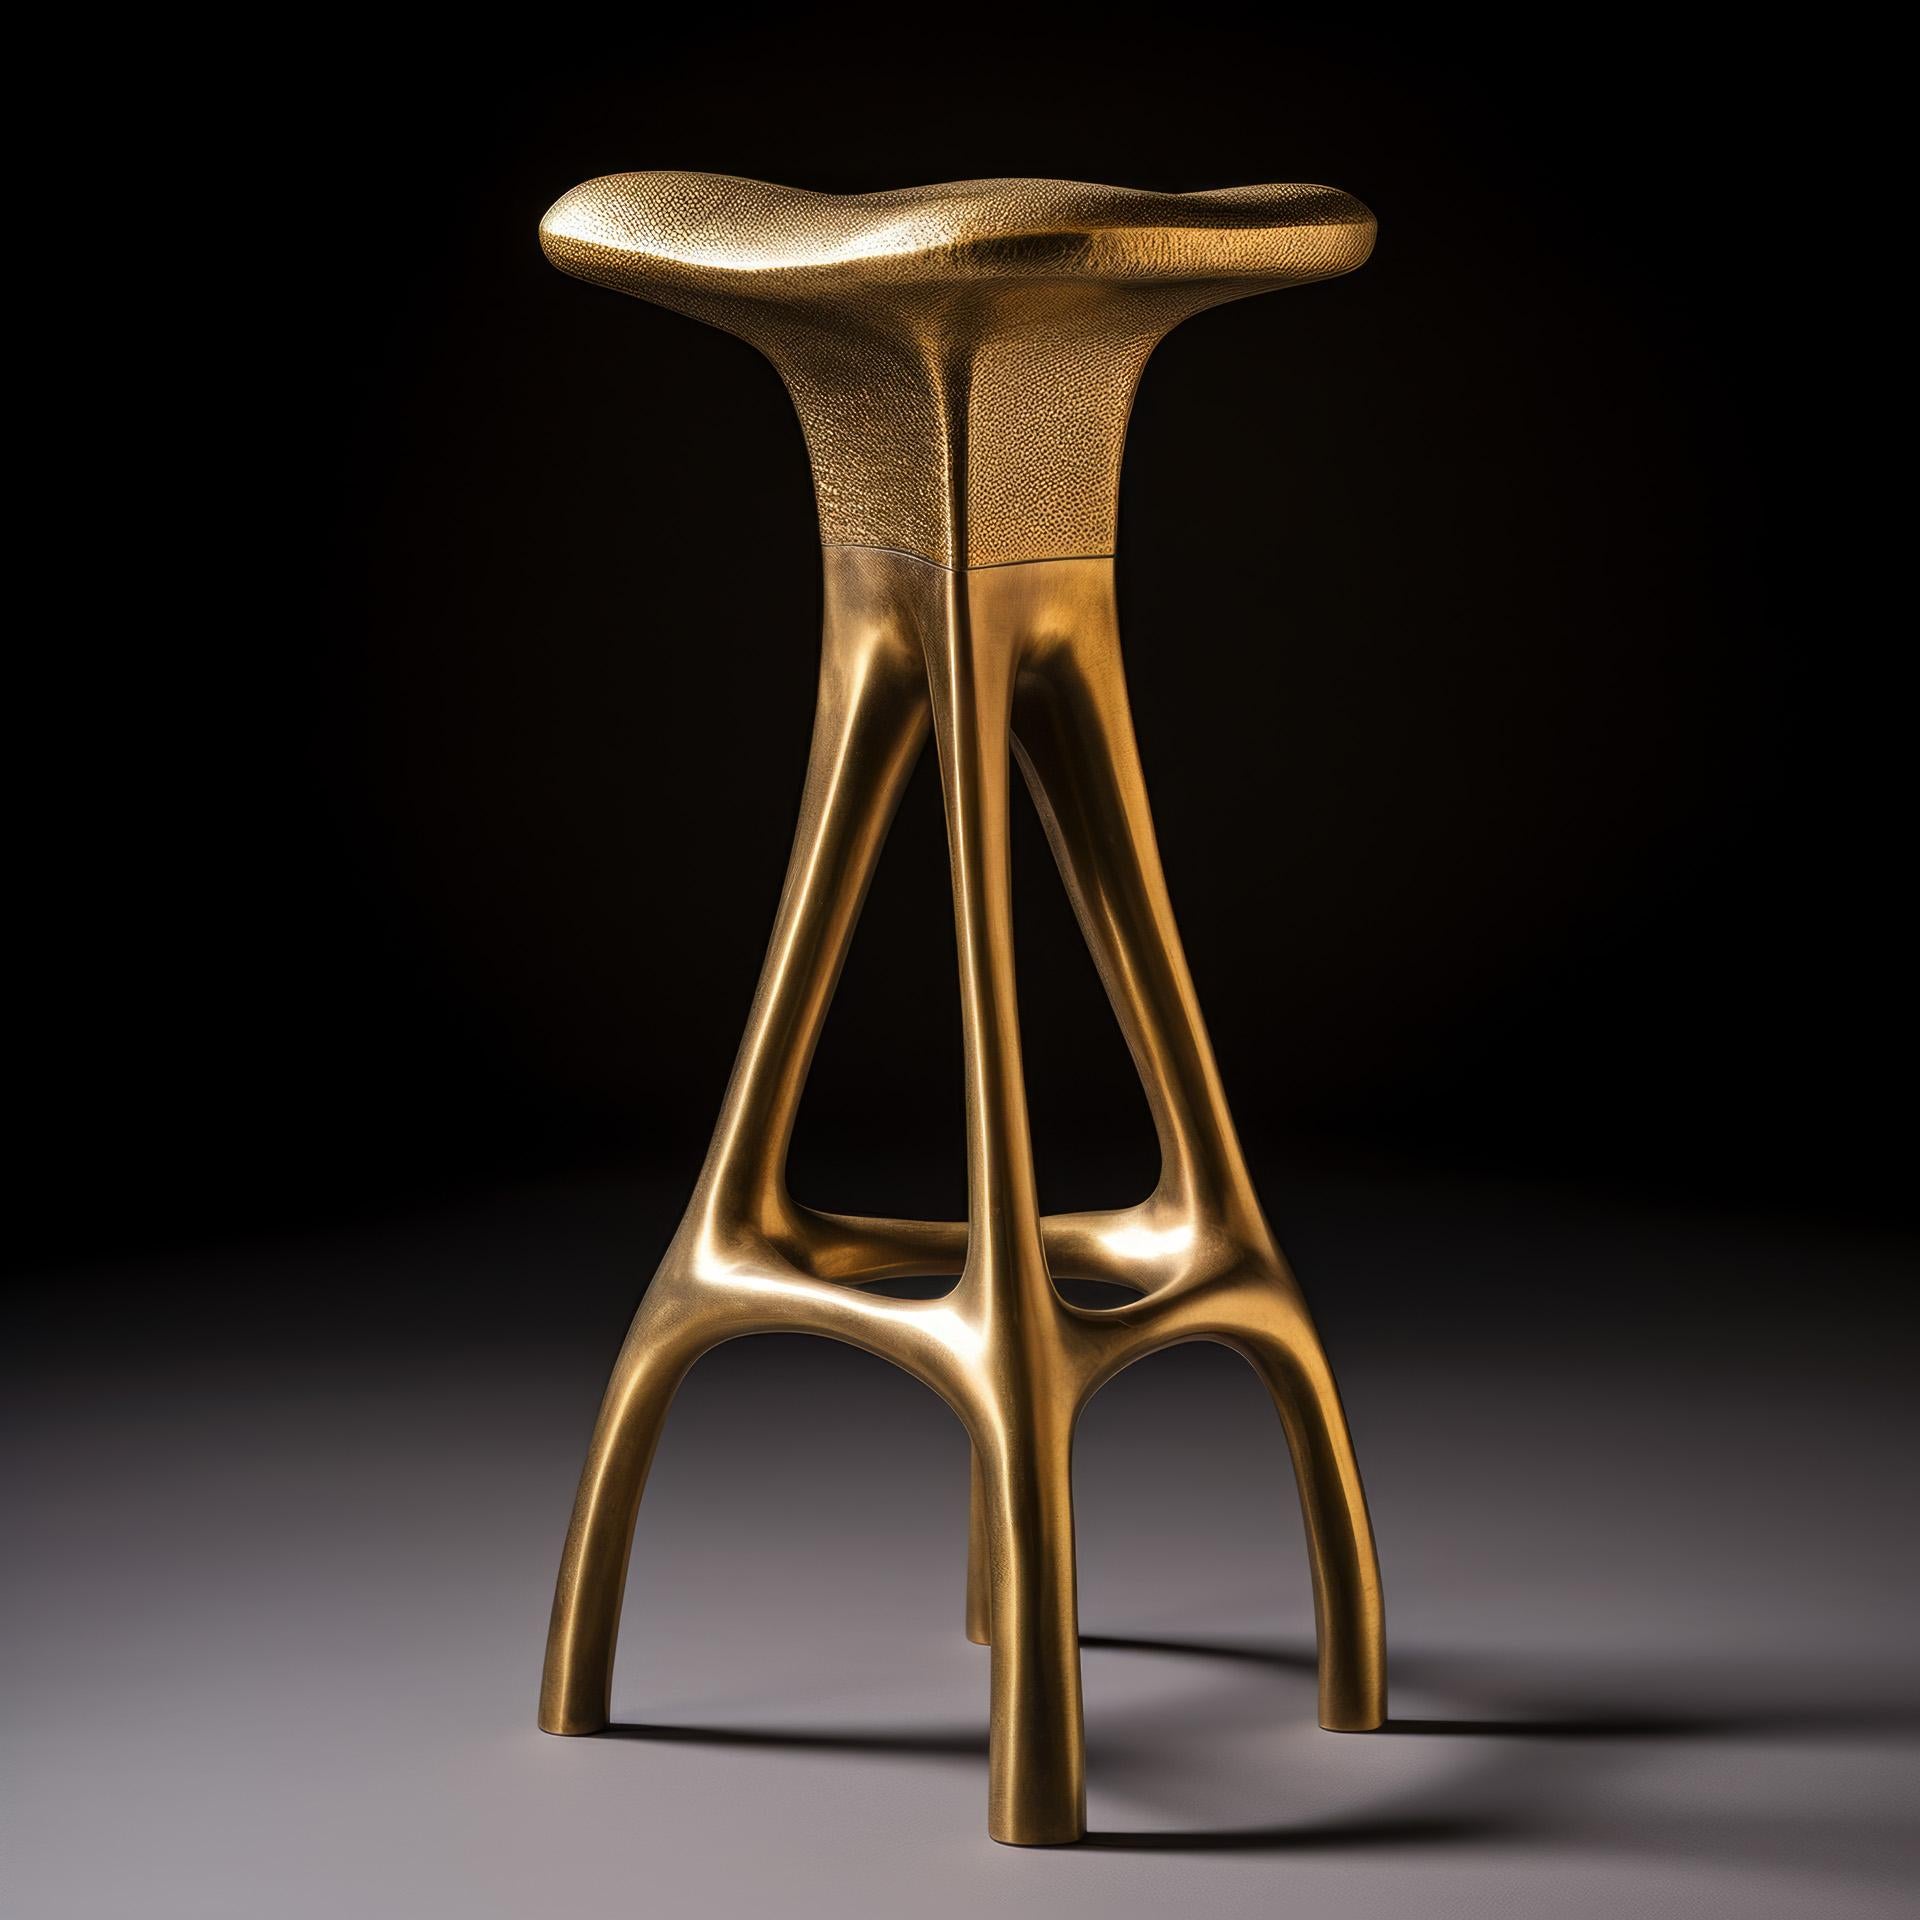 Chu Shi Bar Stool by objective OBJECT Studio
Dimensions: D 30.5 x W 30.5 x H 77.5 cm 
Materials: Brass, aluminum.

objective OBJECT
an embodiment of our architectural ethos.

We represent an unwavering dedication to truth, impartiality, and the